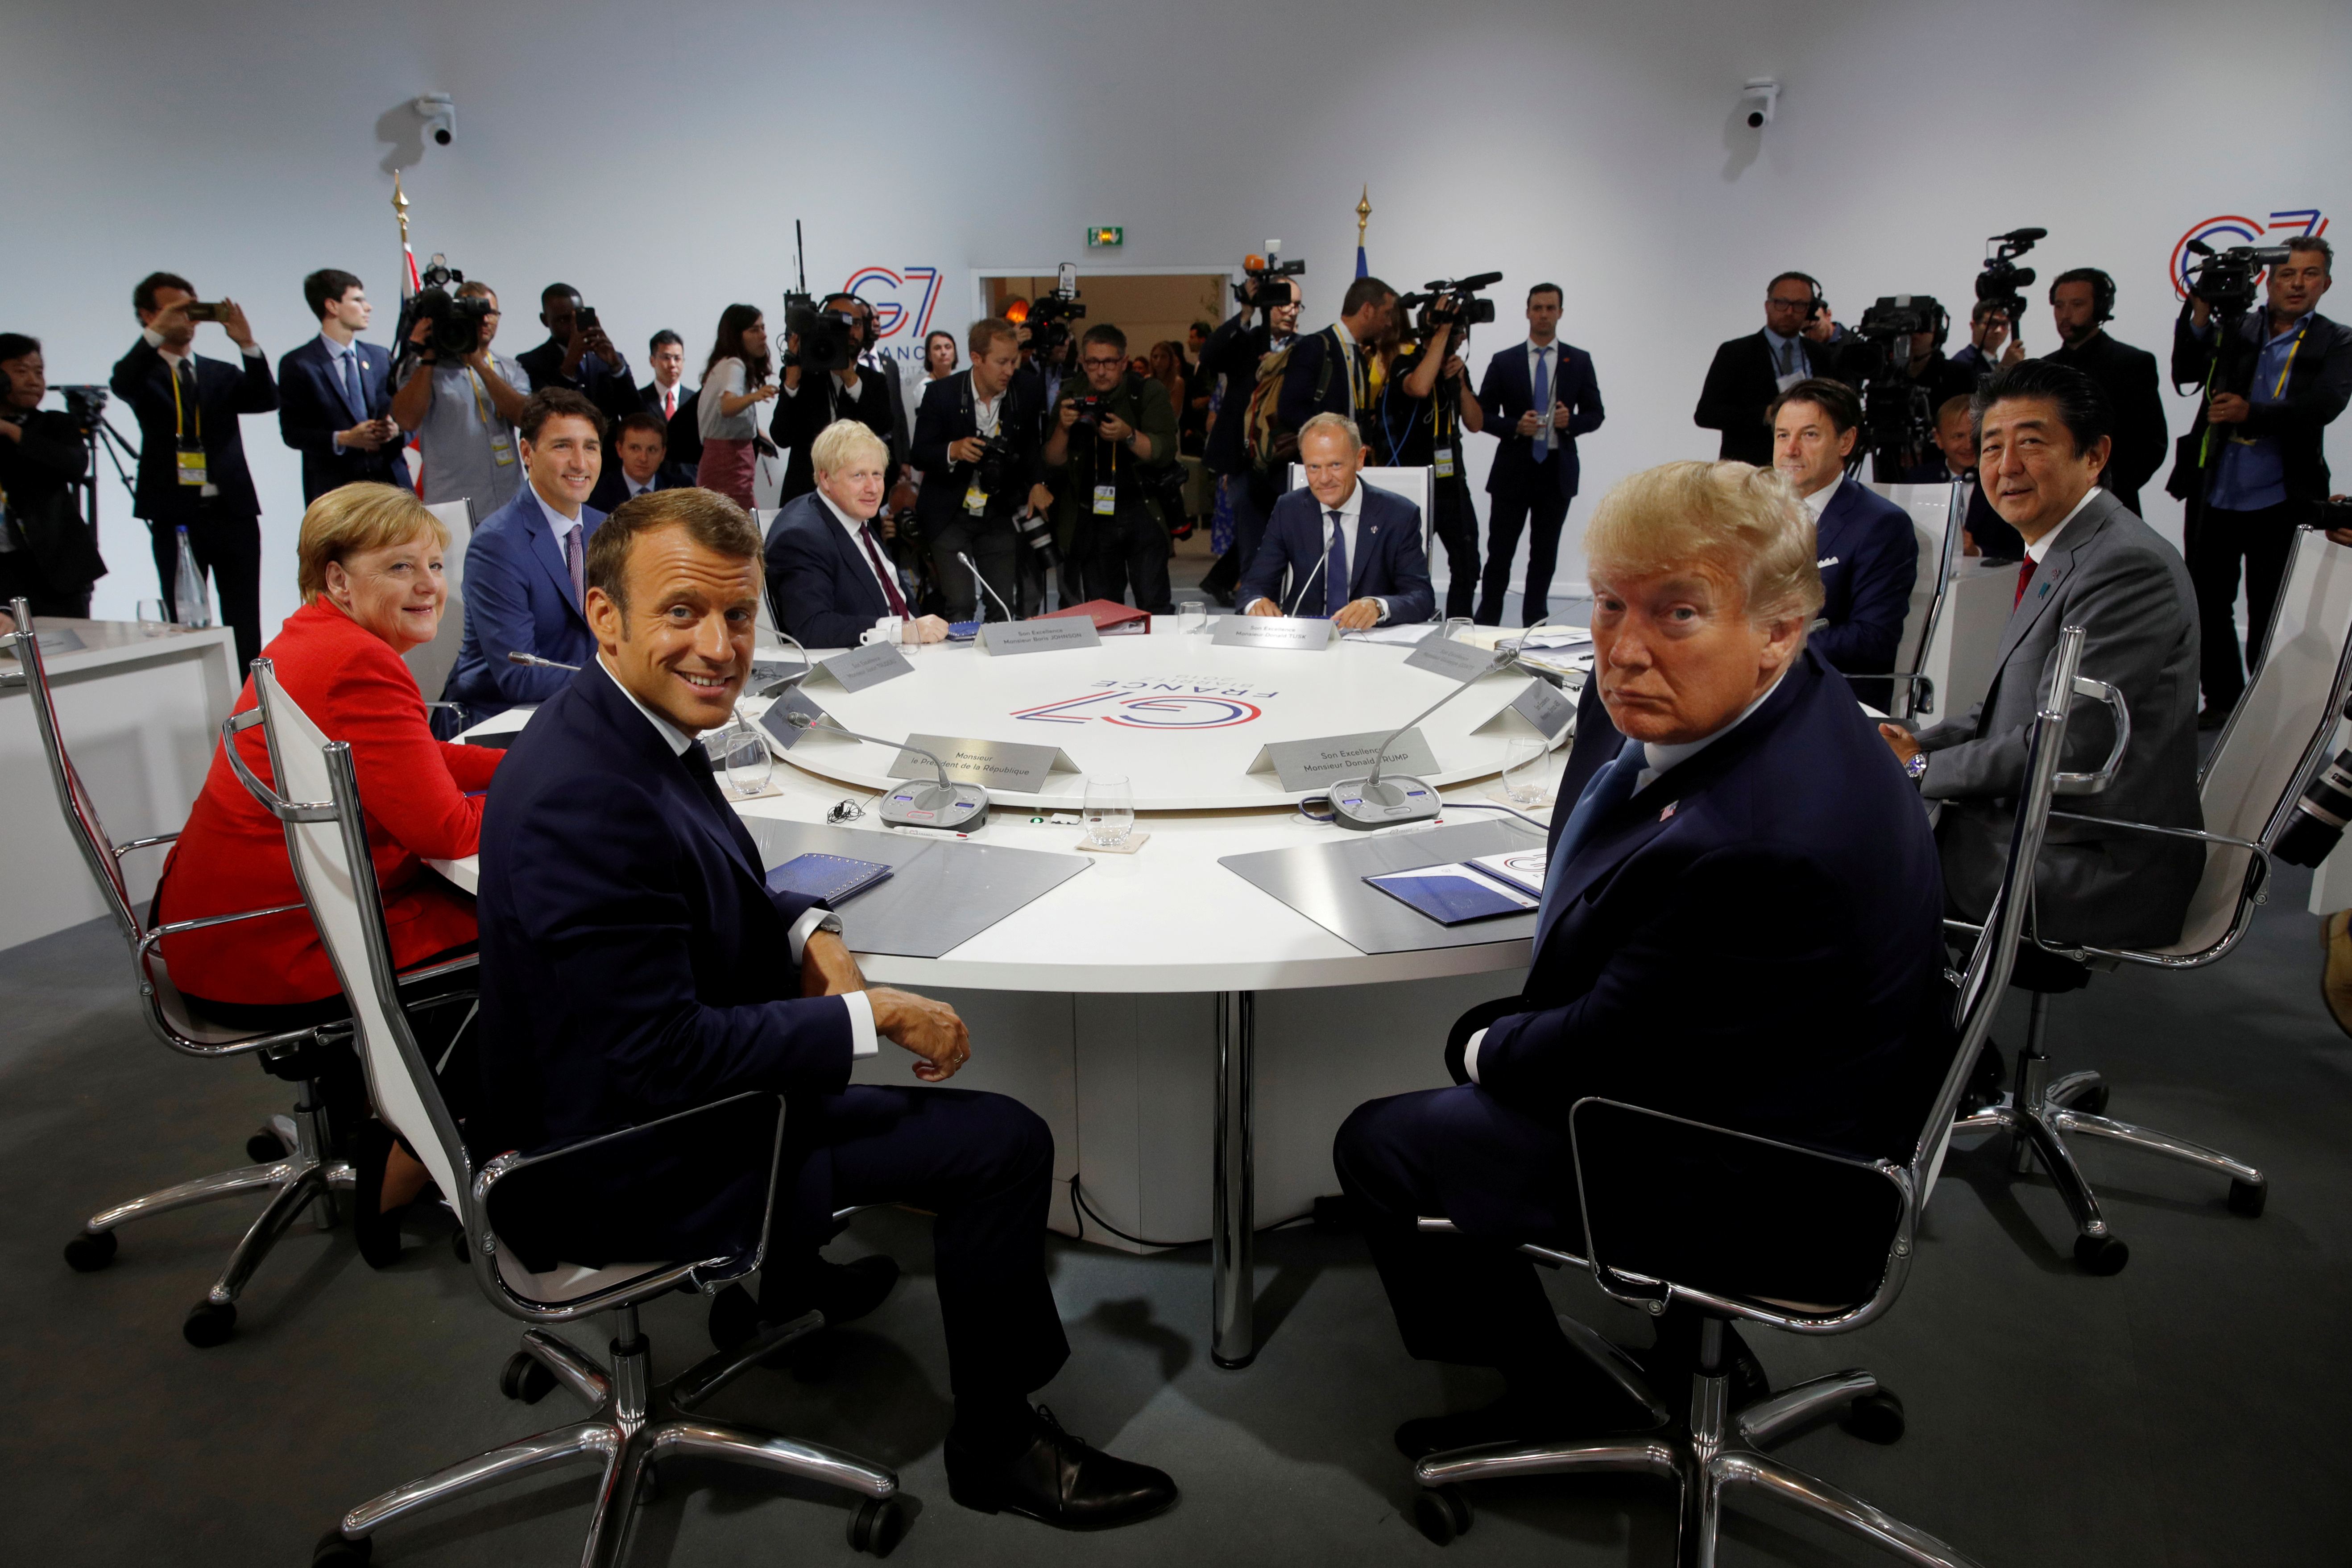 G7 leaders during a working session at the G7 summit in Biarritz, France, on August 25, 2019. (Philippe Wojazer/Pool, Reuters)